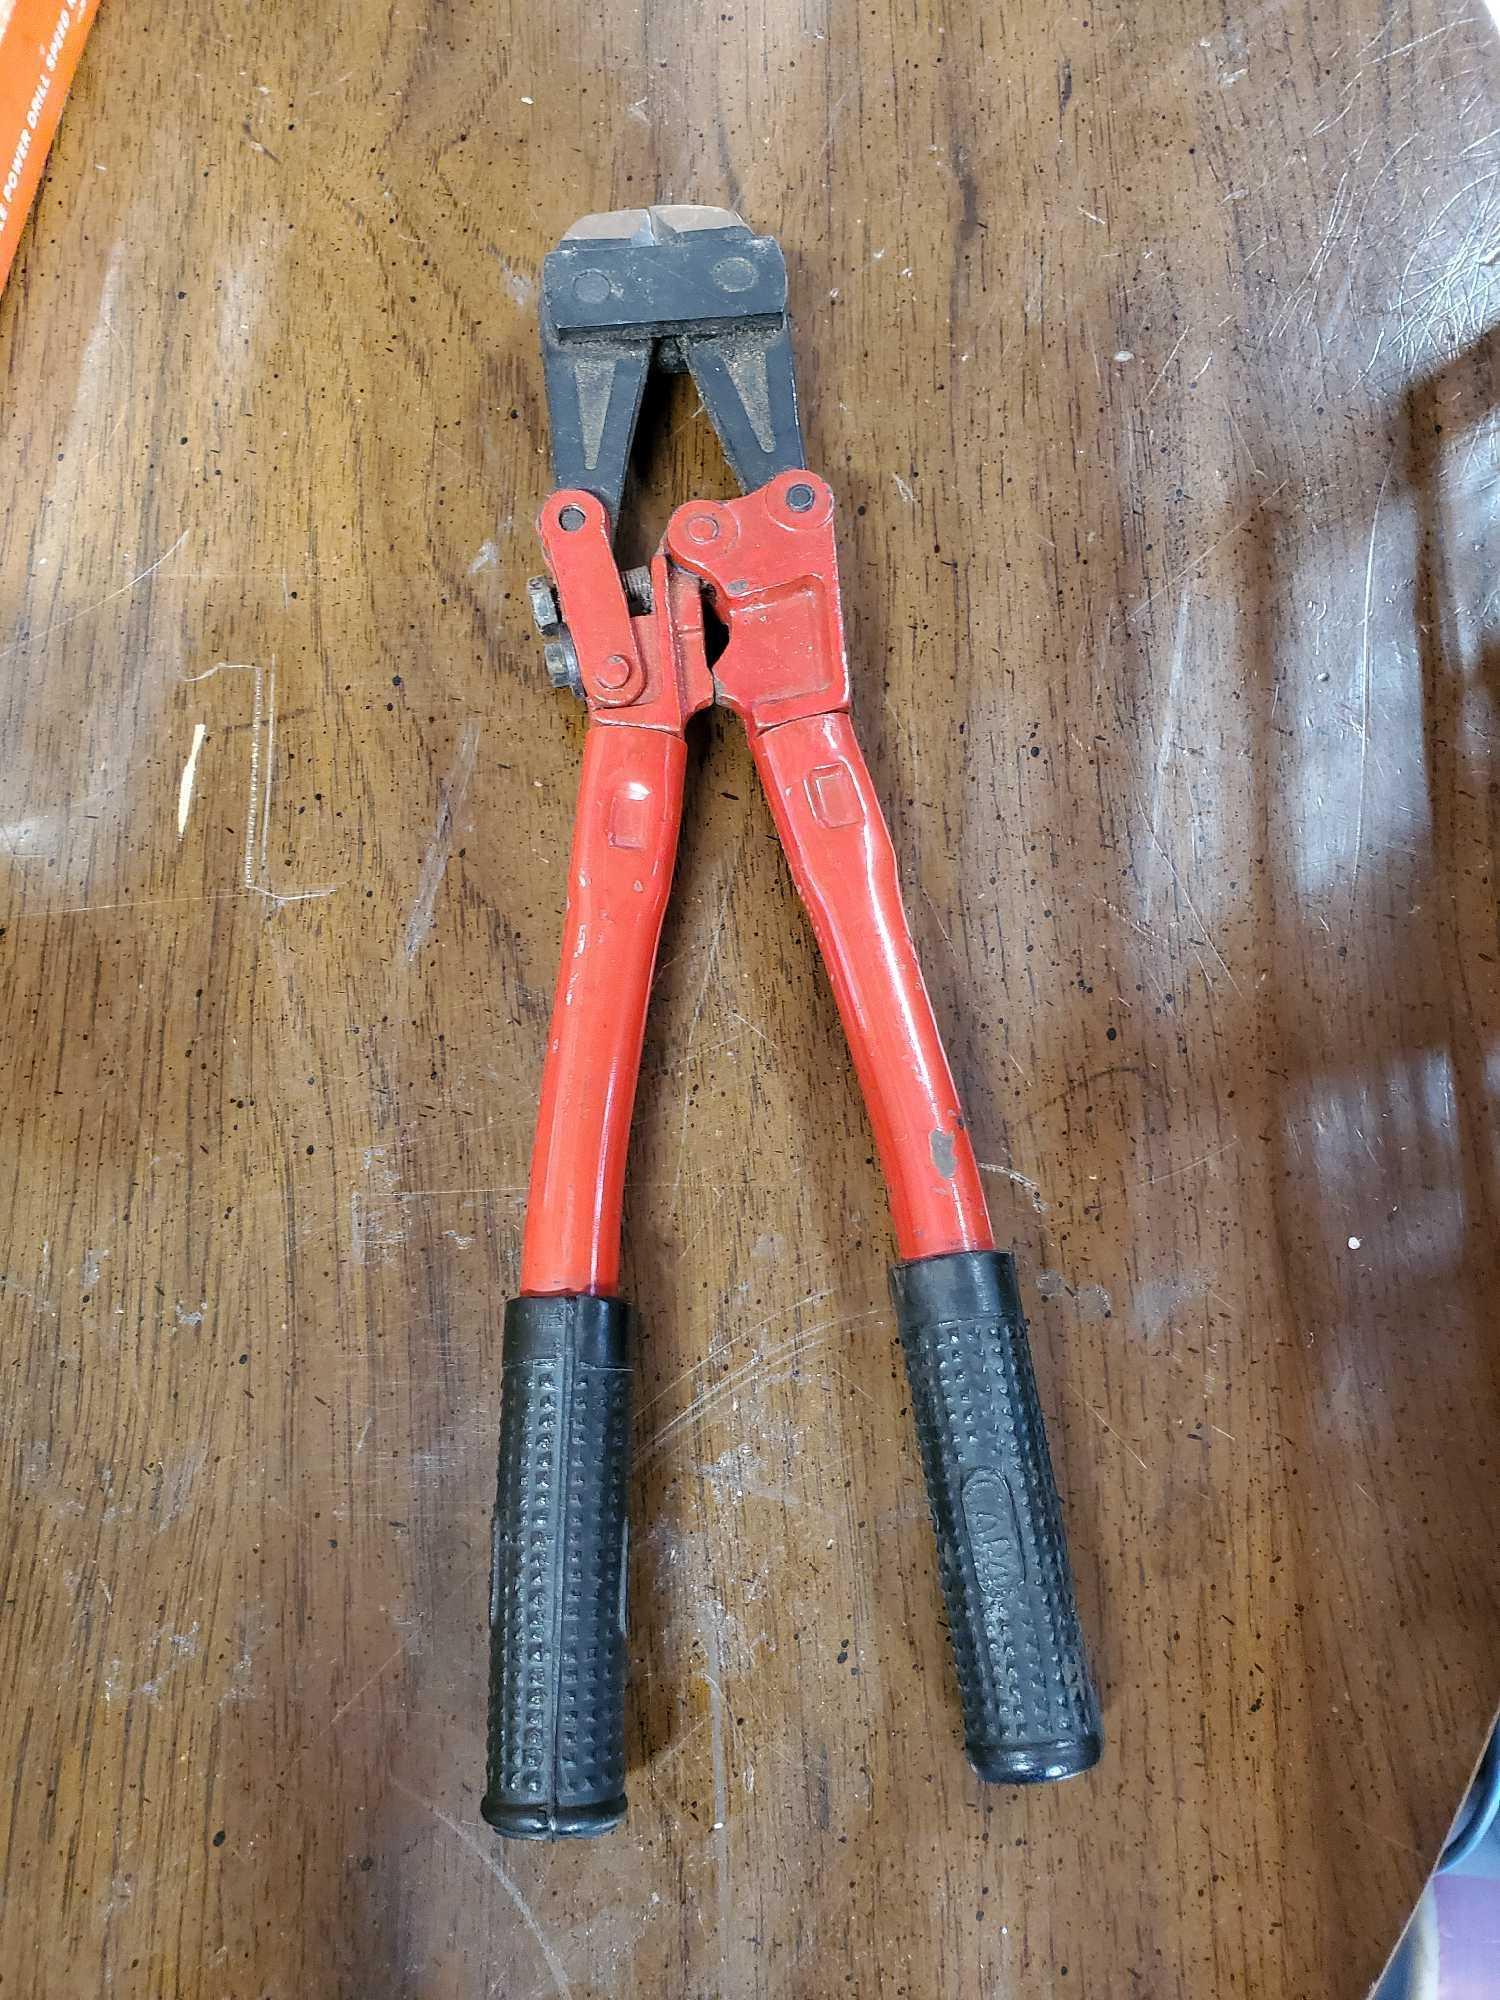 9 LOCKS-SMALL AND LARGE BOLT CUTTERS